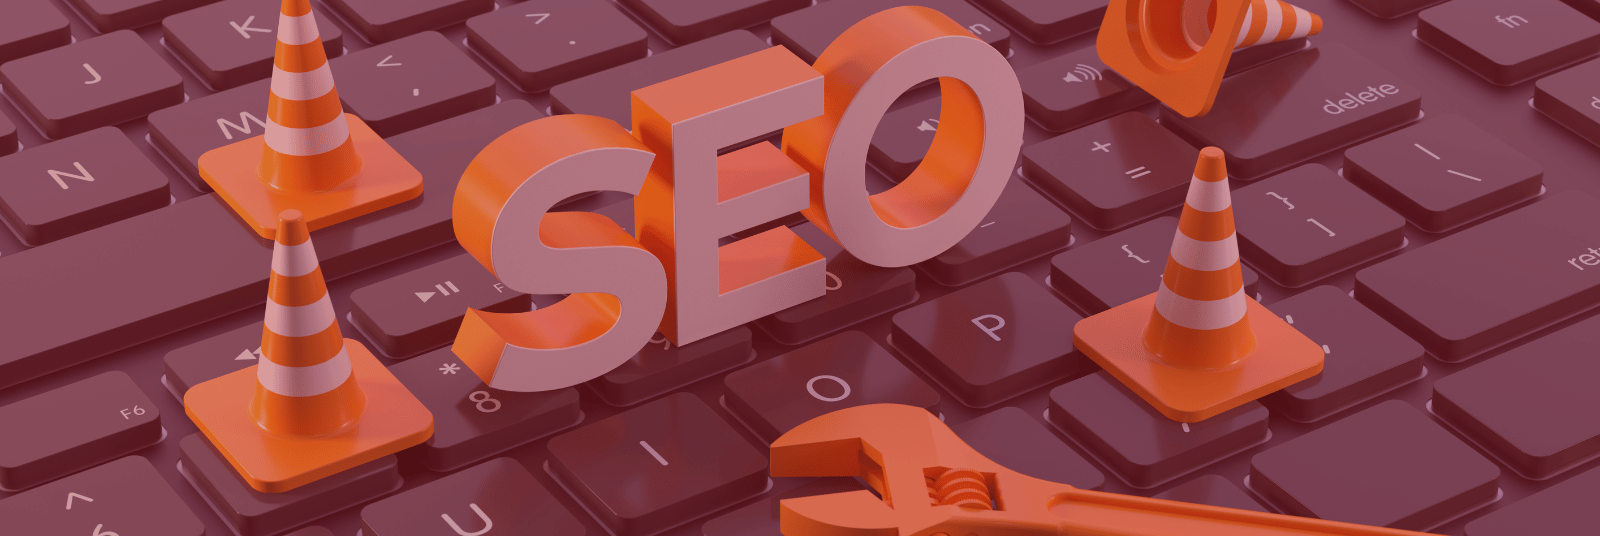 "SEO" in block letters placed overtop a keyboard, surrounded by traffic cones and a wrench to symbolize the concept of technical SEO services. Tinted in Digital Strike - Targeted Marketing brand red.